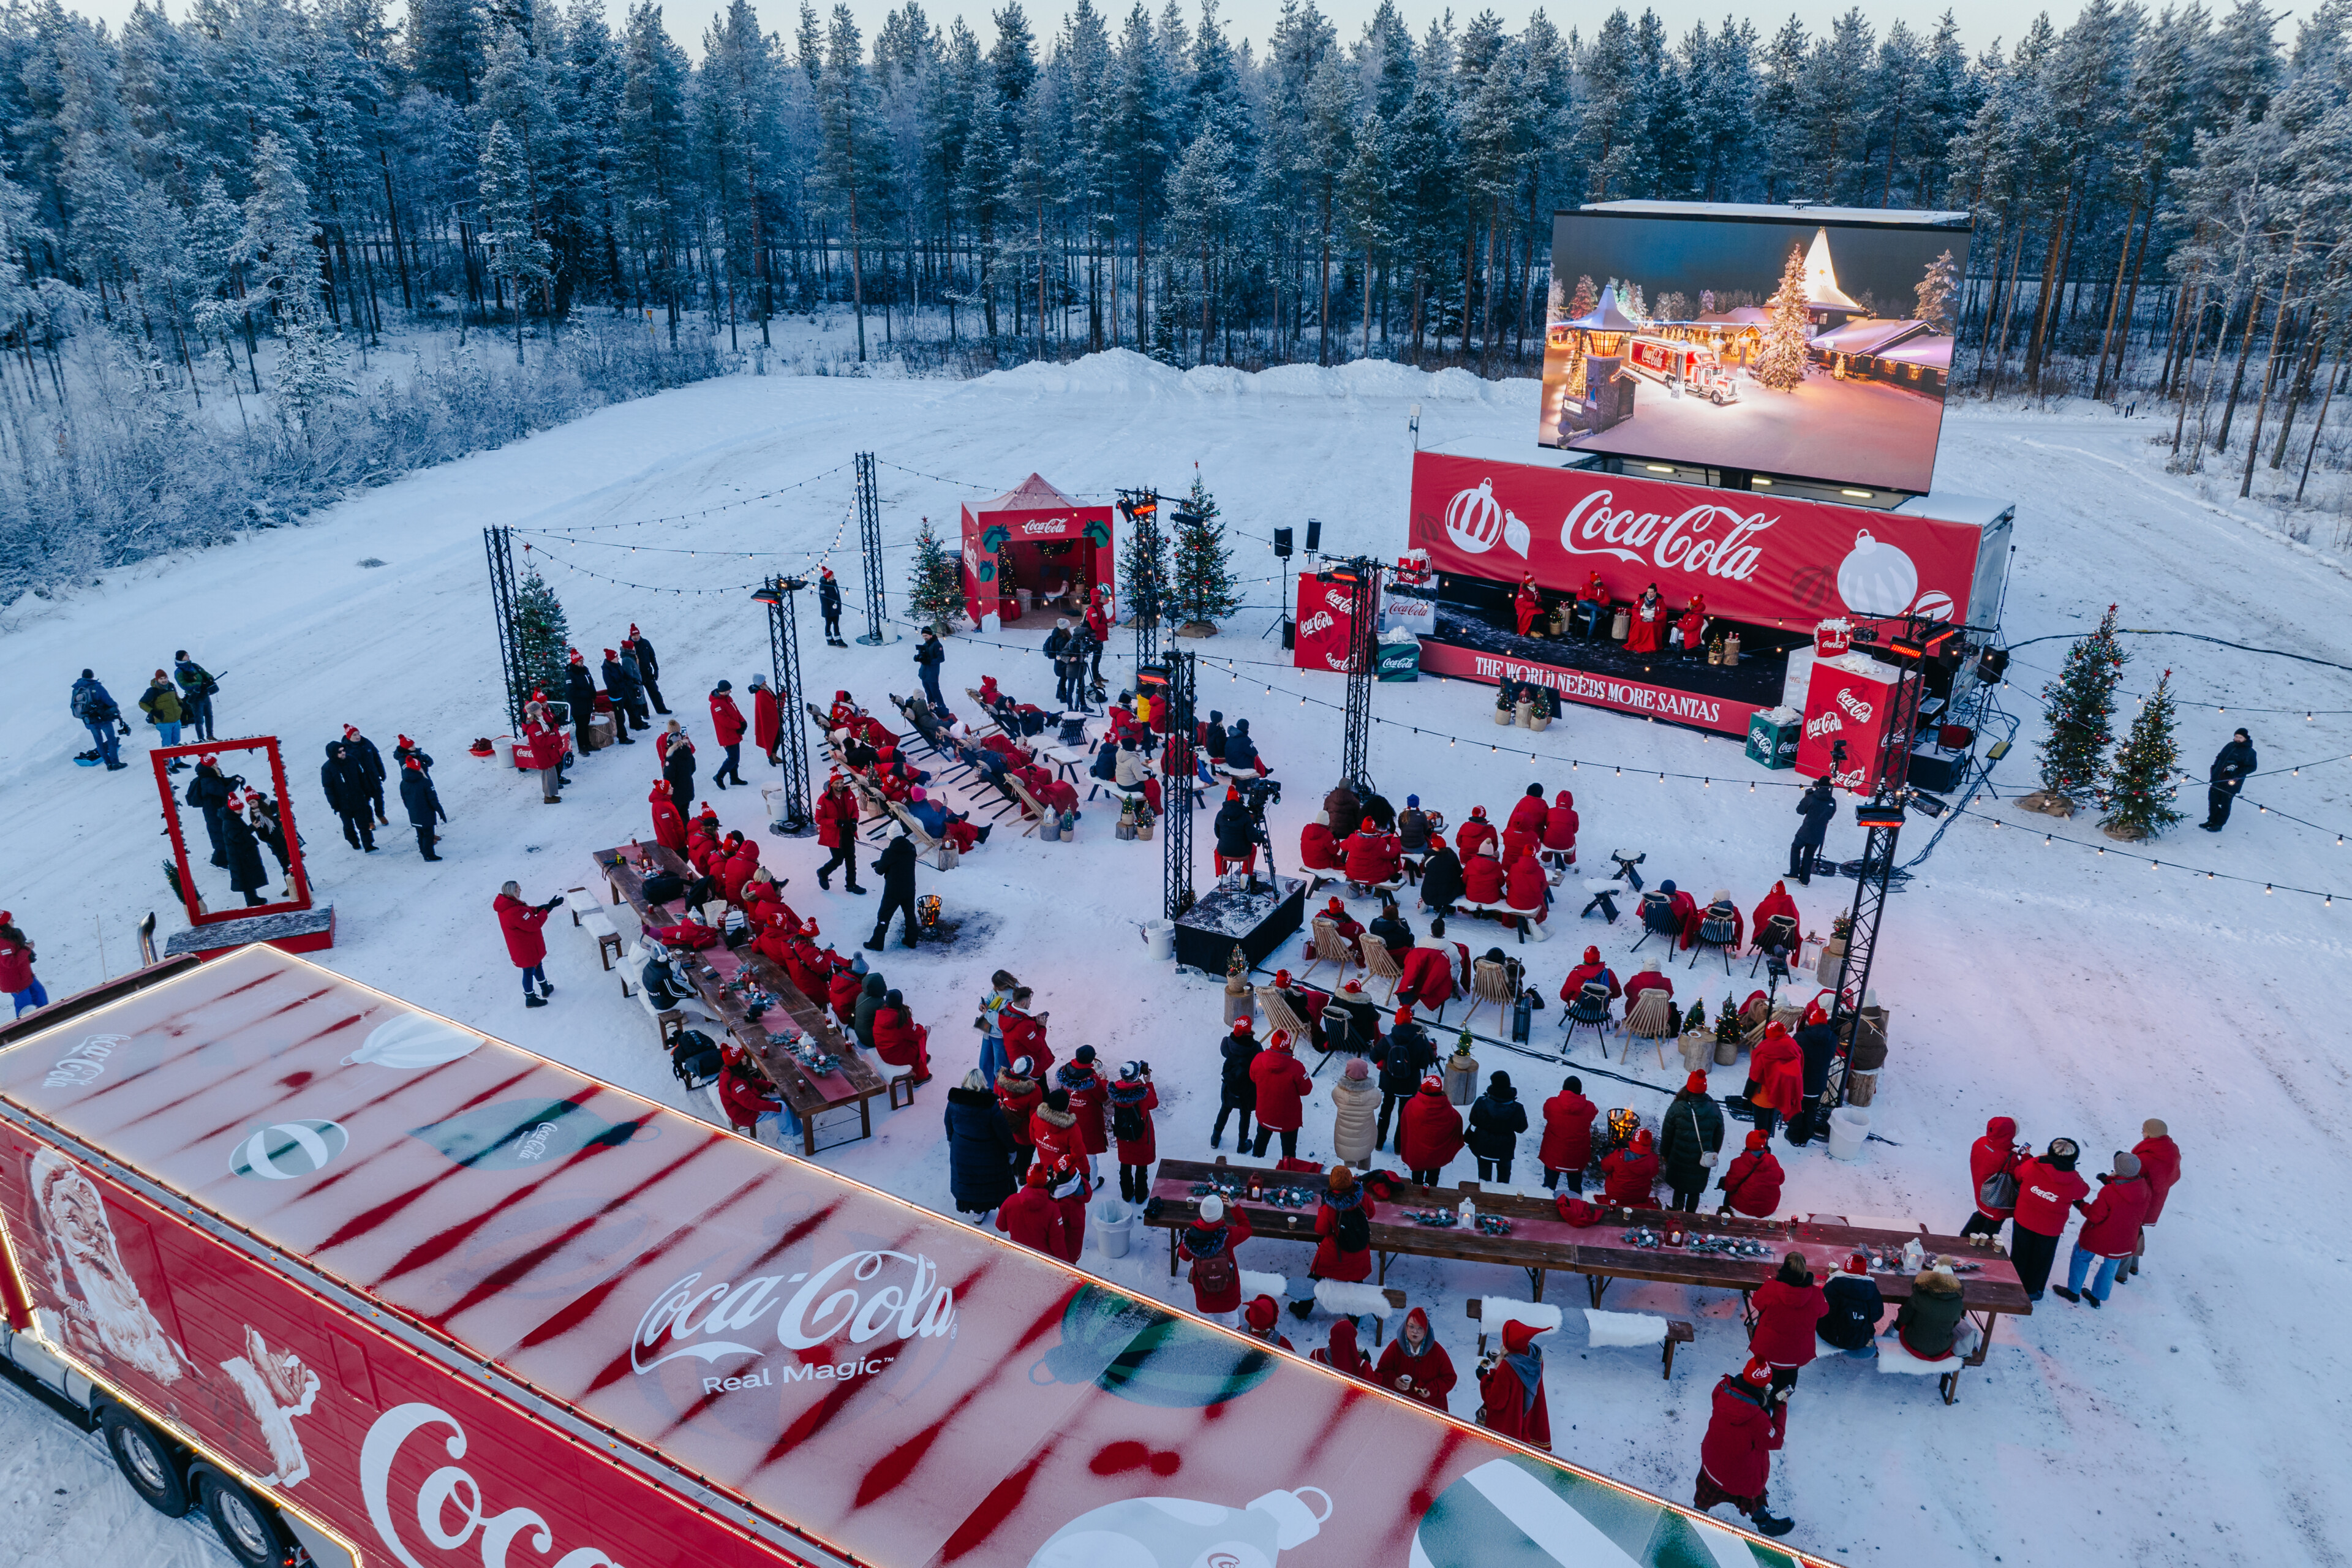 Coca-Cola Christmas campaign launching event with Coca-Cola truck and influencers in Santa Claus Village in Arctic Circle